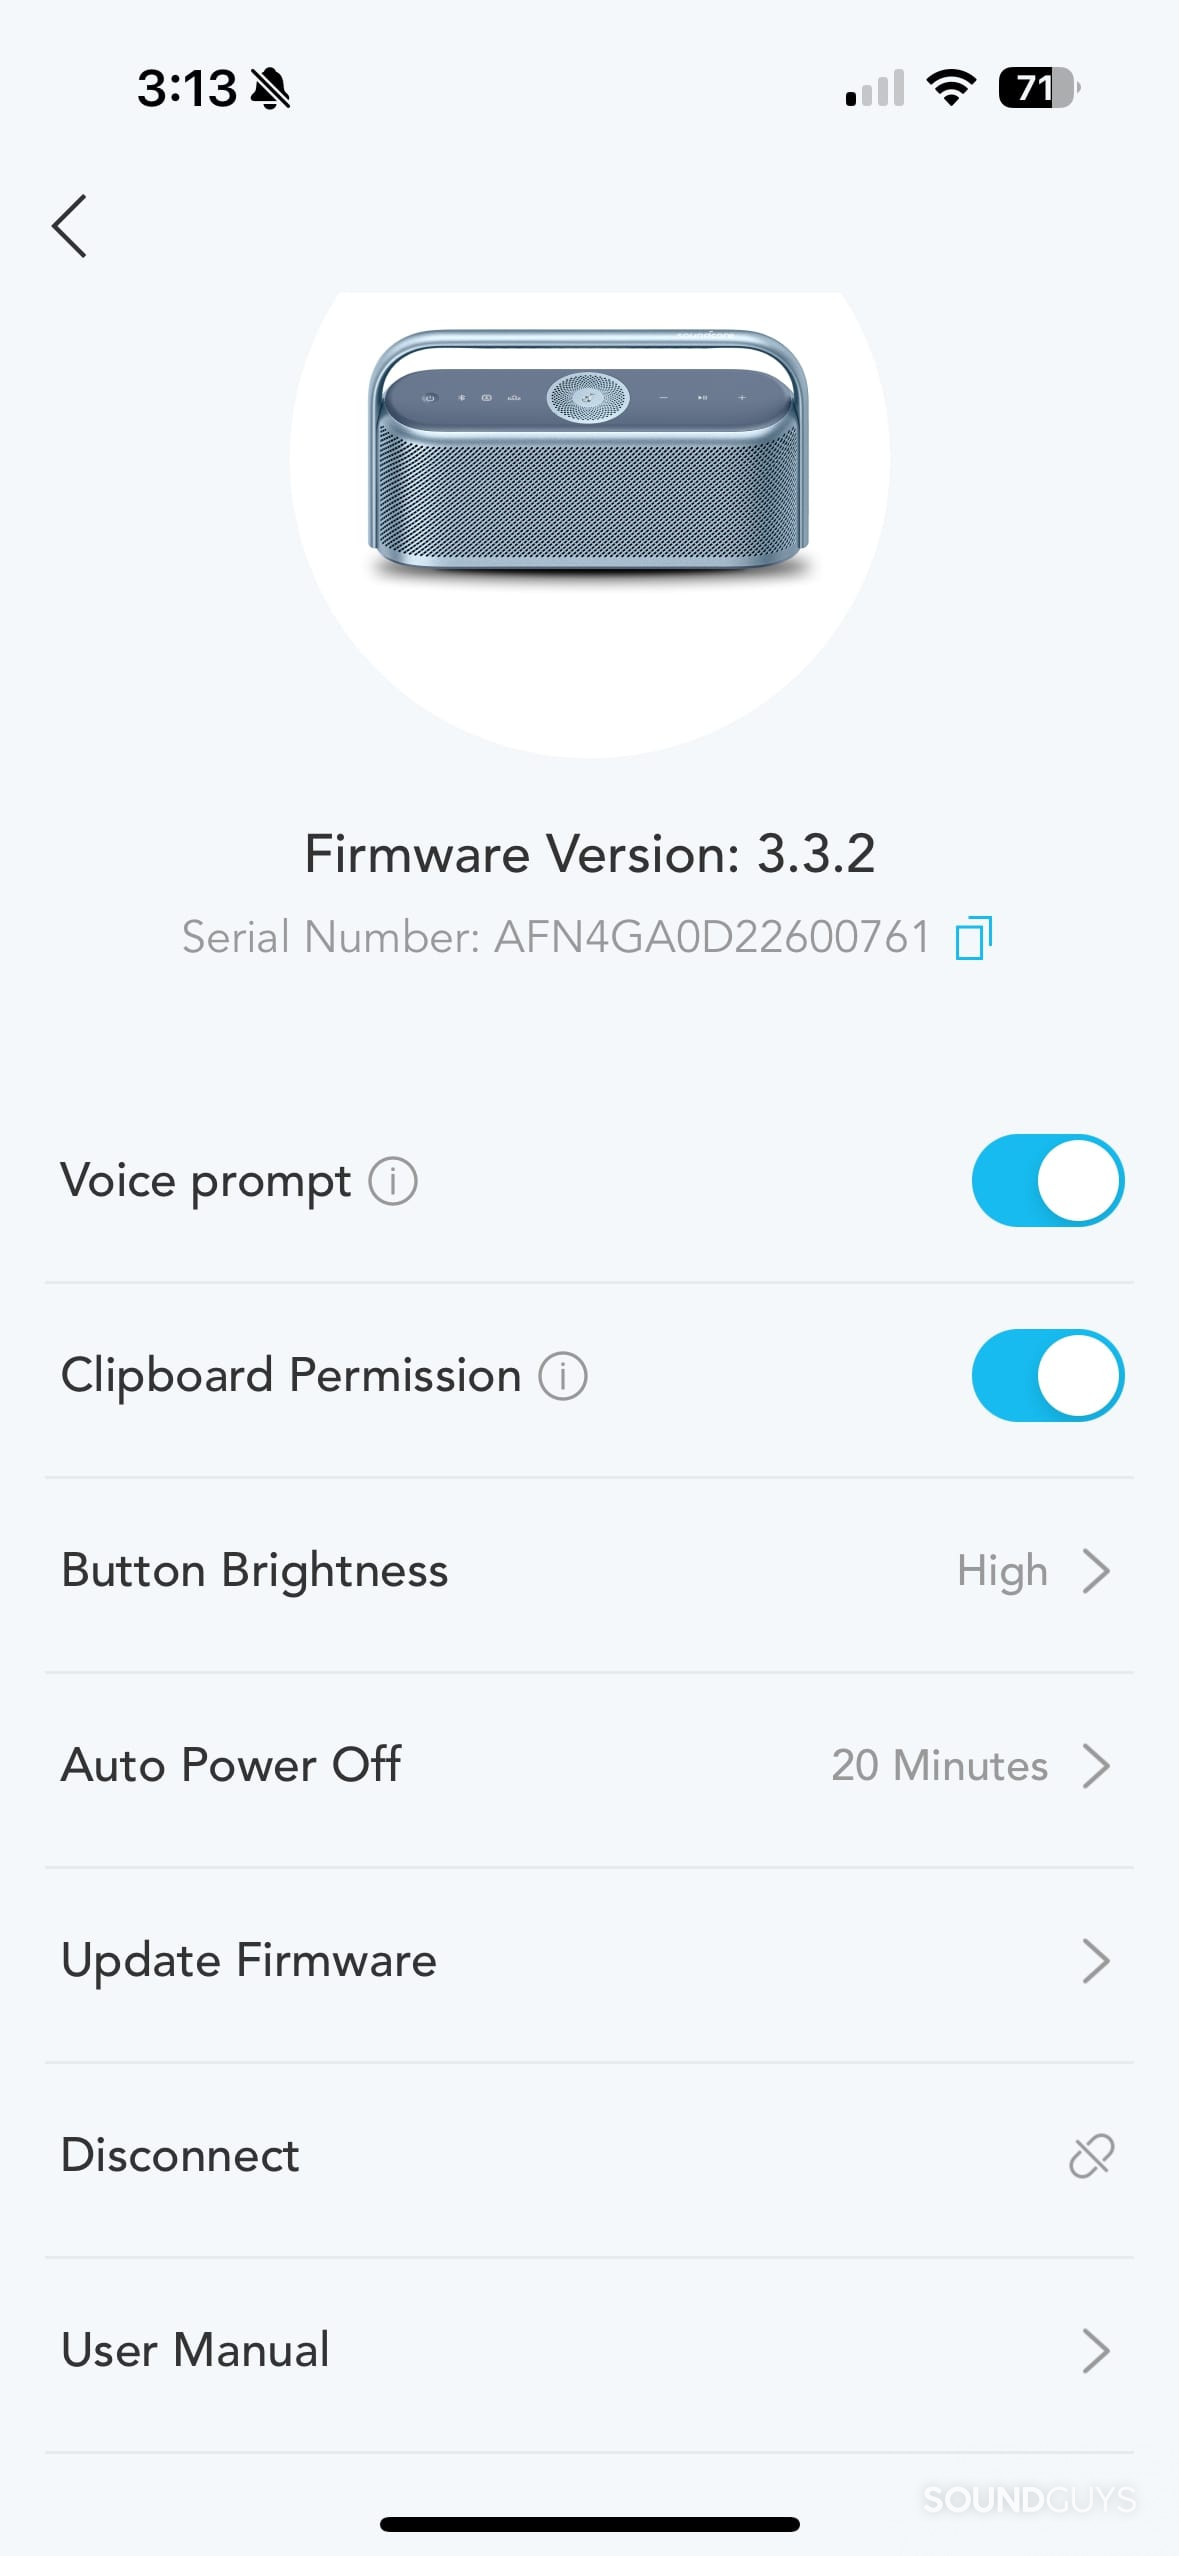 Anker Soundcore Motion X600 firmware and settings screen.